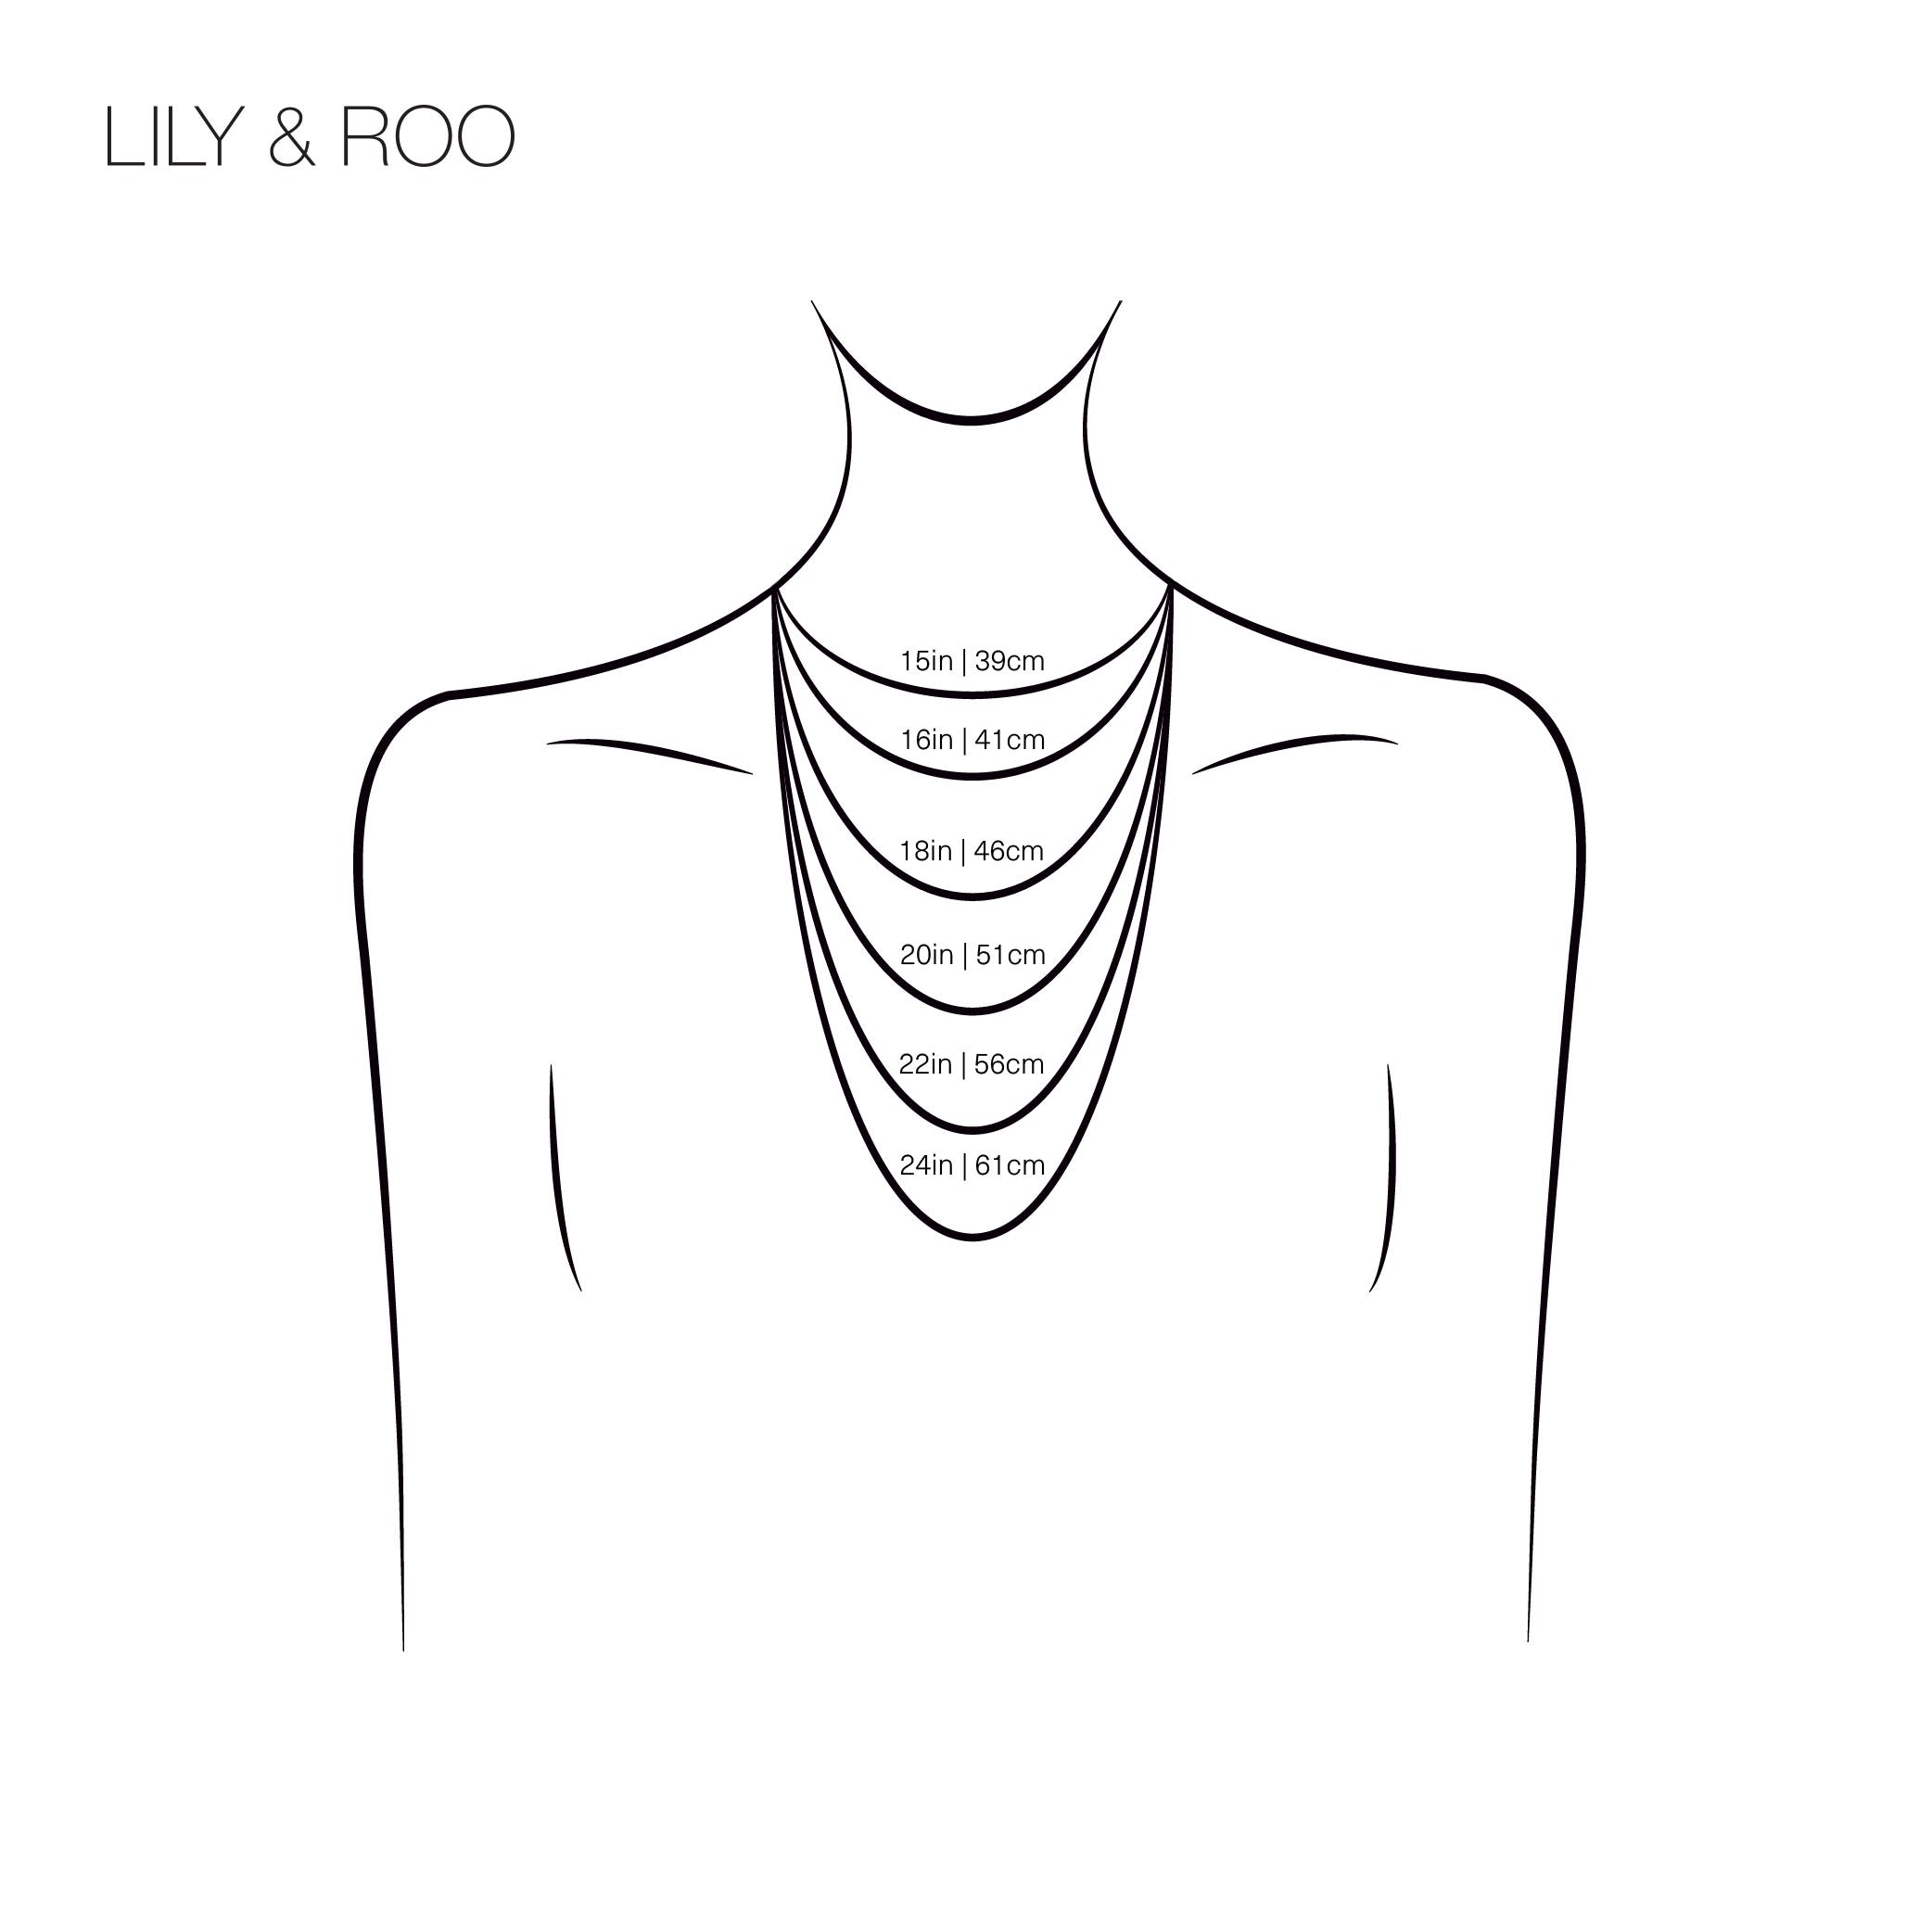 Female silhouette drawing with necklaces drawn on her neck with their sizes labelled in inches and cm